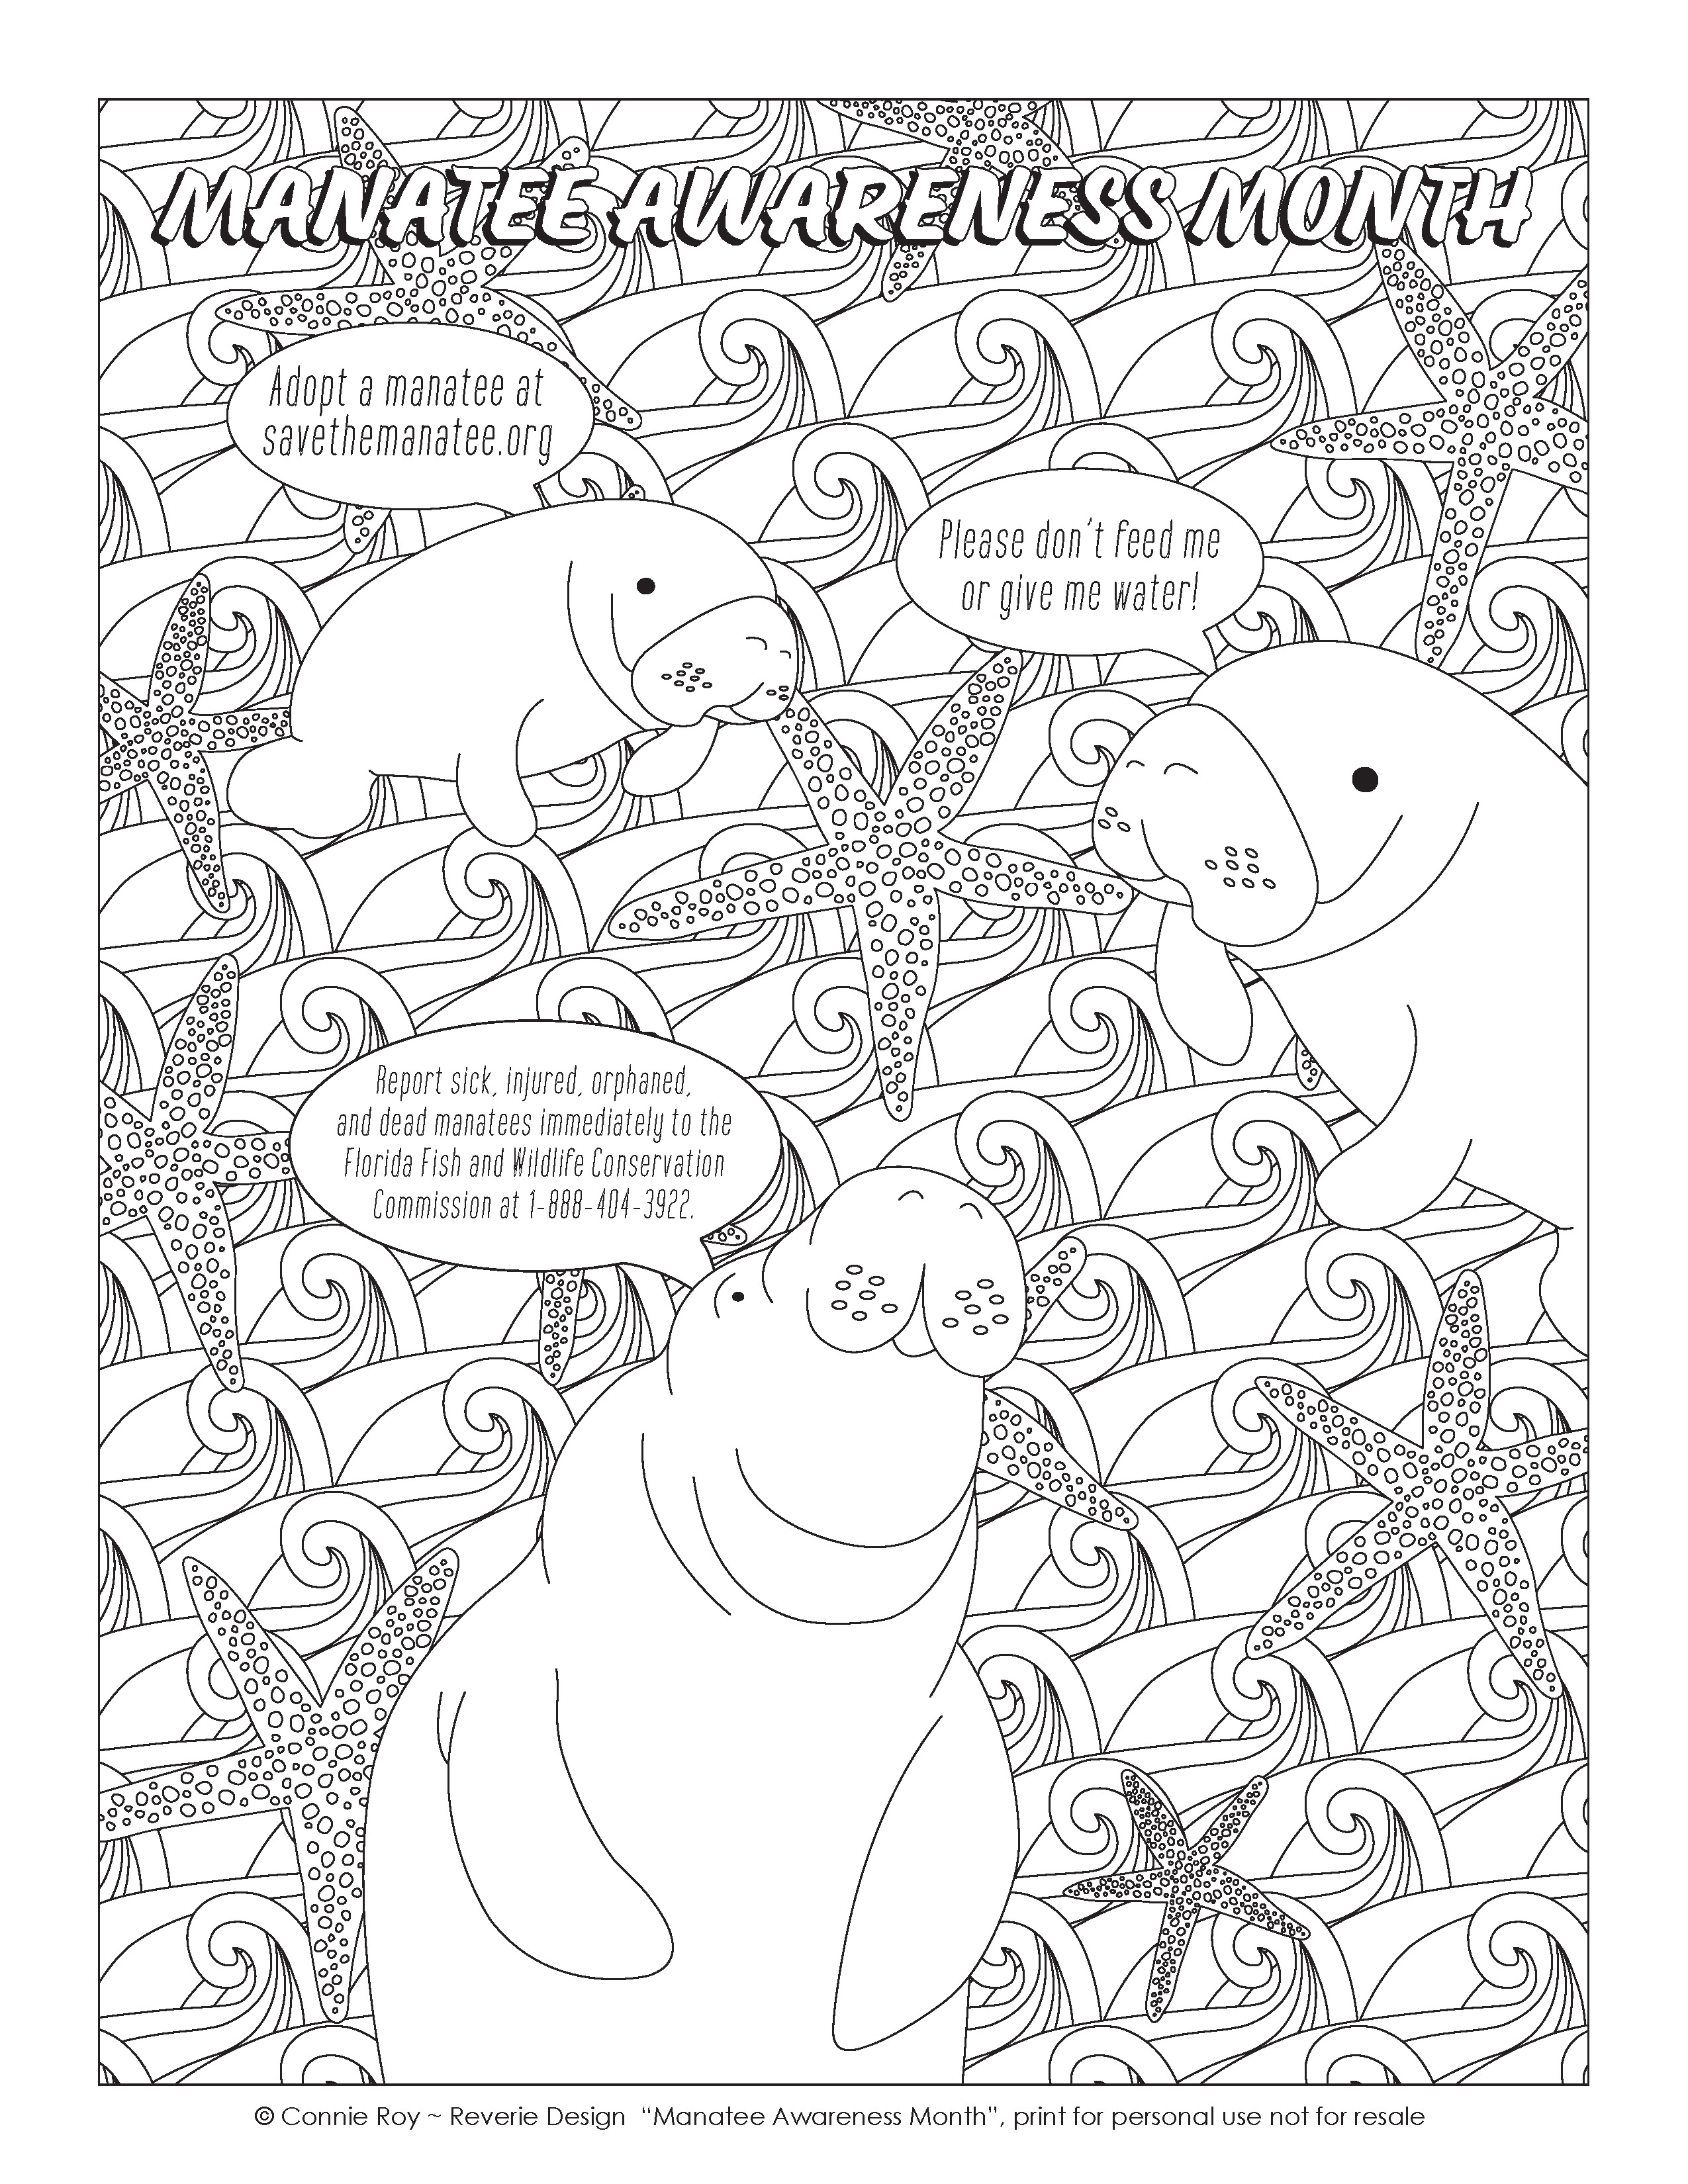 Save the manatee on x its manateeawarenessmonth and here is a fun activity for the whole family and all of those who love to color reveriedesign designed this beautiful manatee coloring page